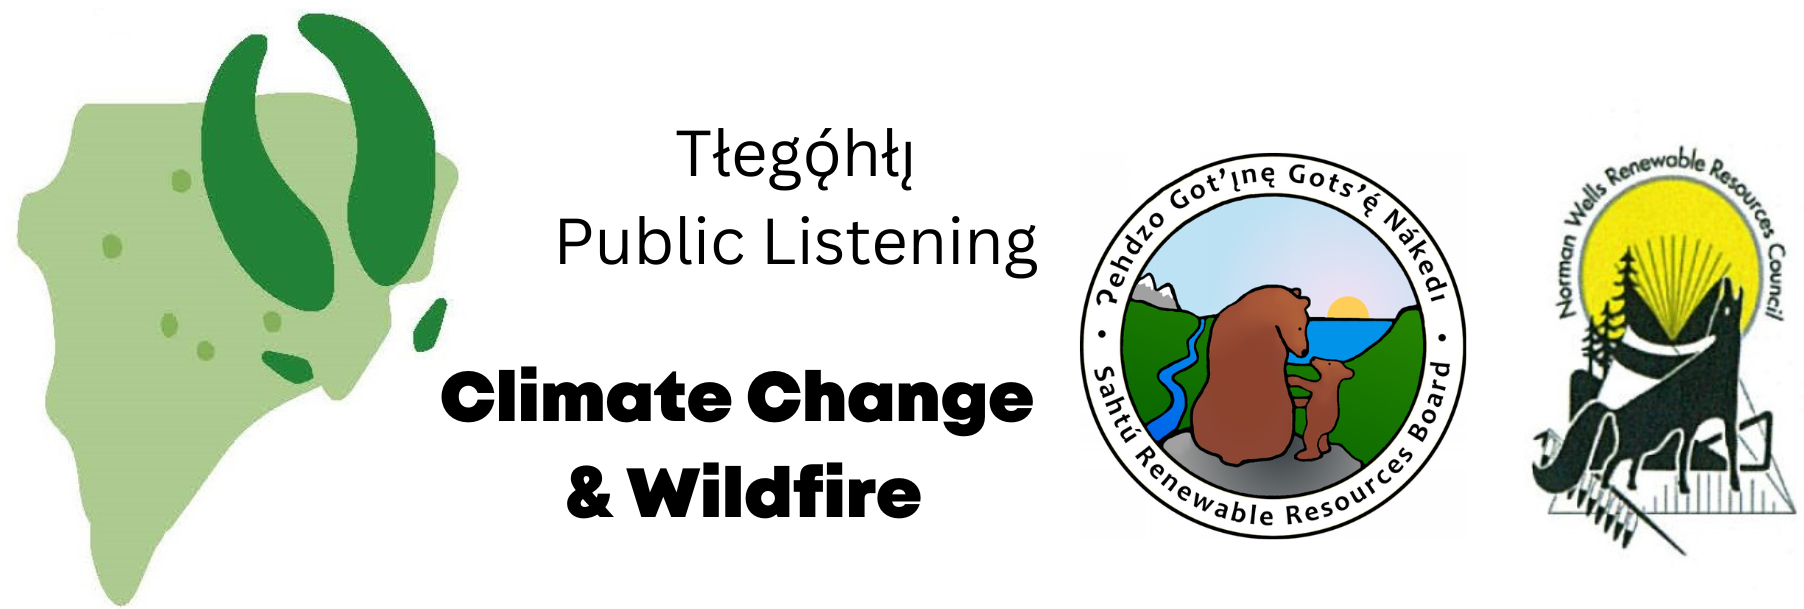 Climate Change and Wildfire all logos